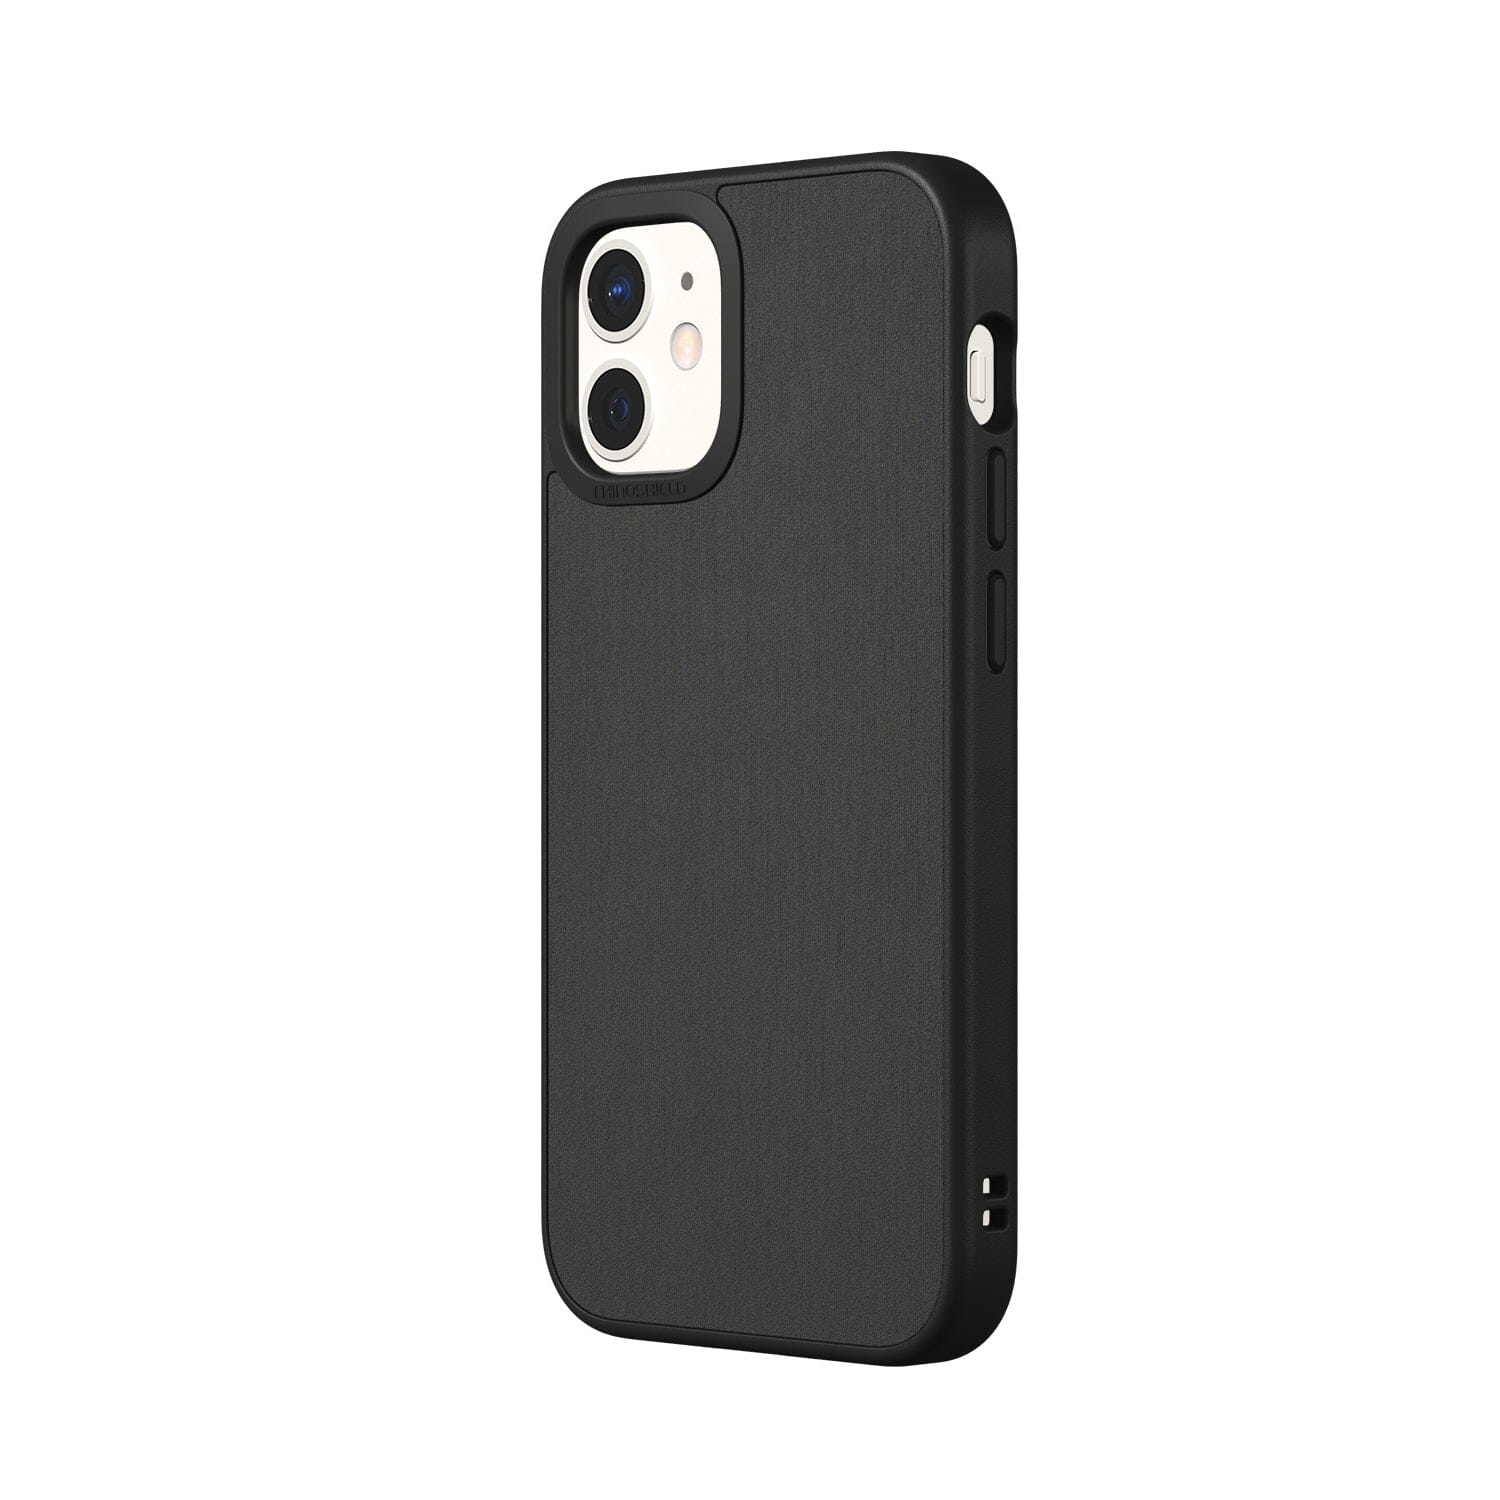 RhinoShield SolidSuit Protective Case with Premium Finish for iPhone 12 Series (2020) iPhone 12 Series RhinoShield iPhone 12 mini 5.4" Brushed Steel 